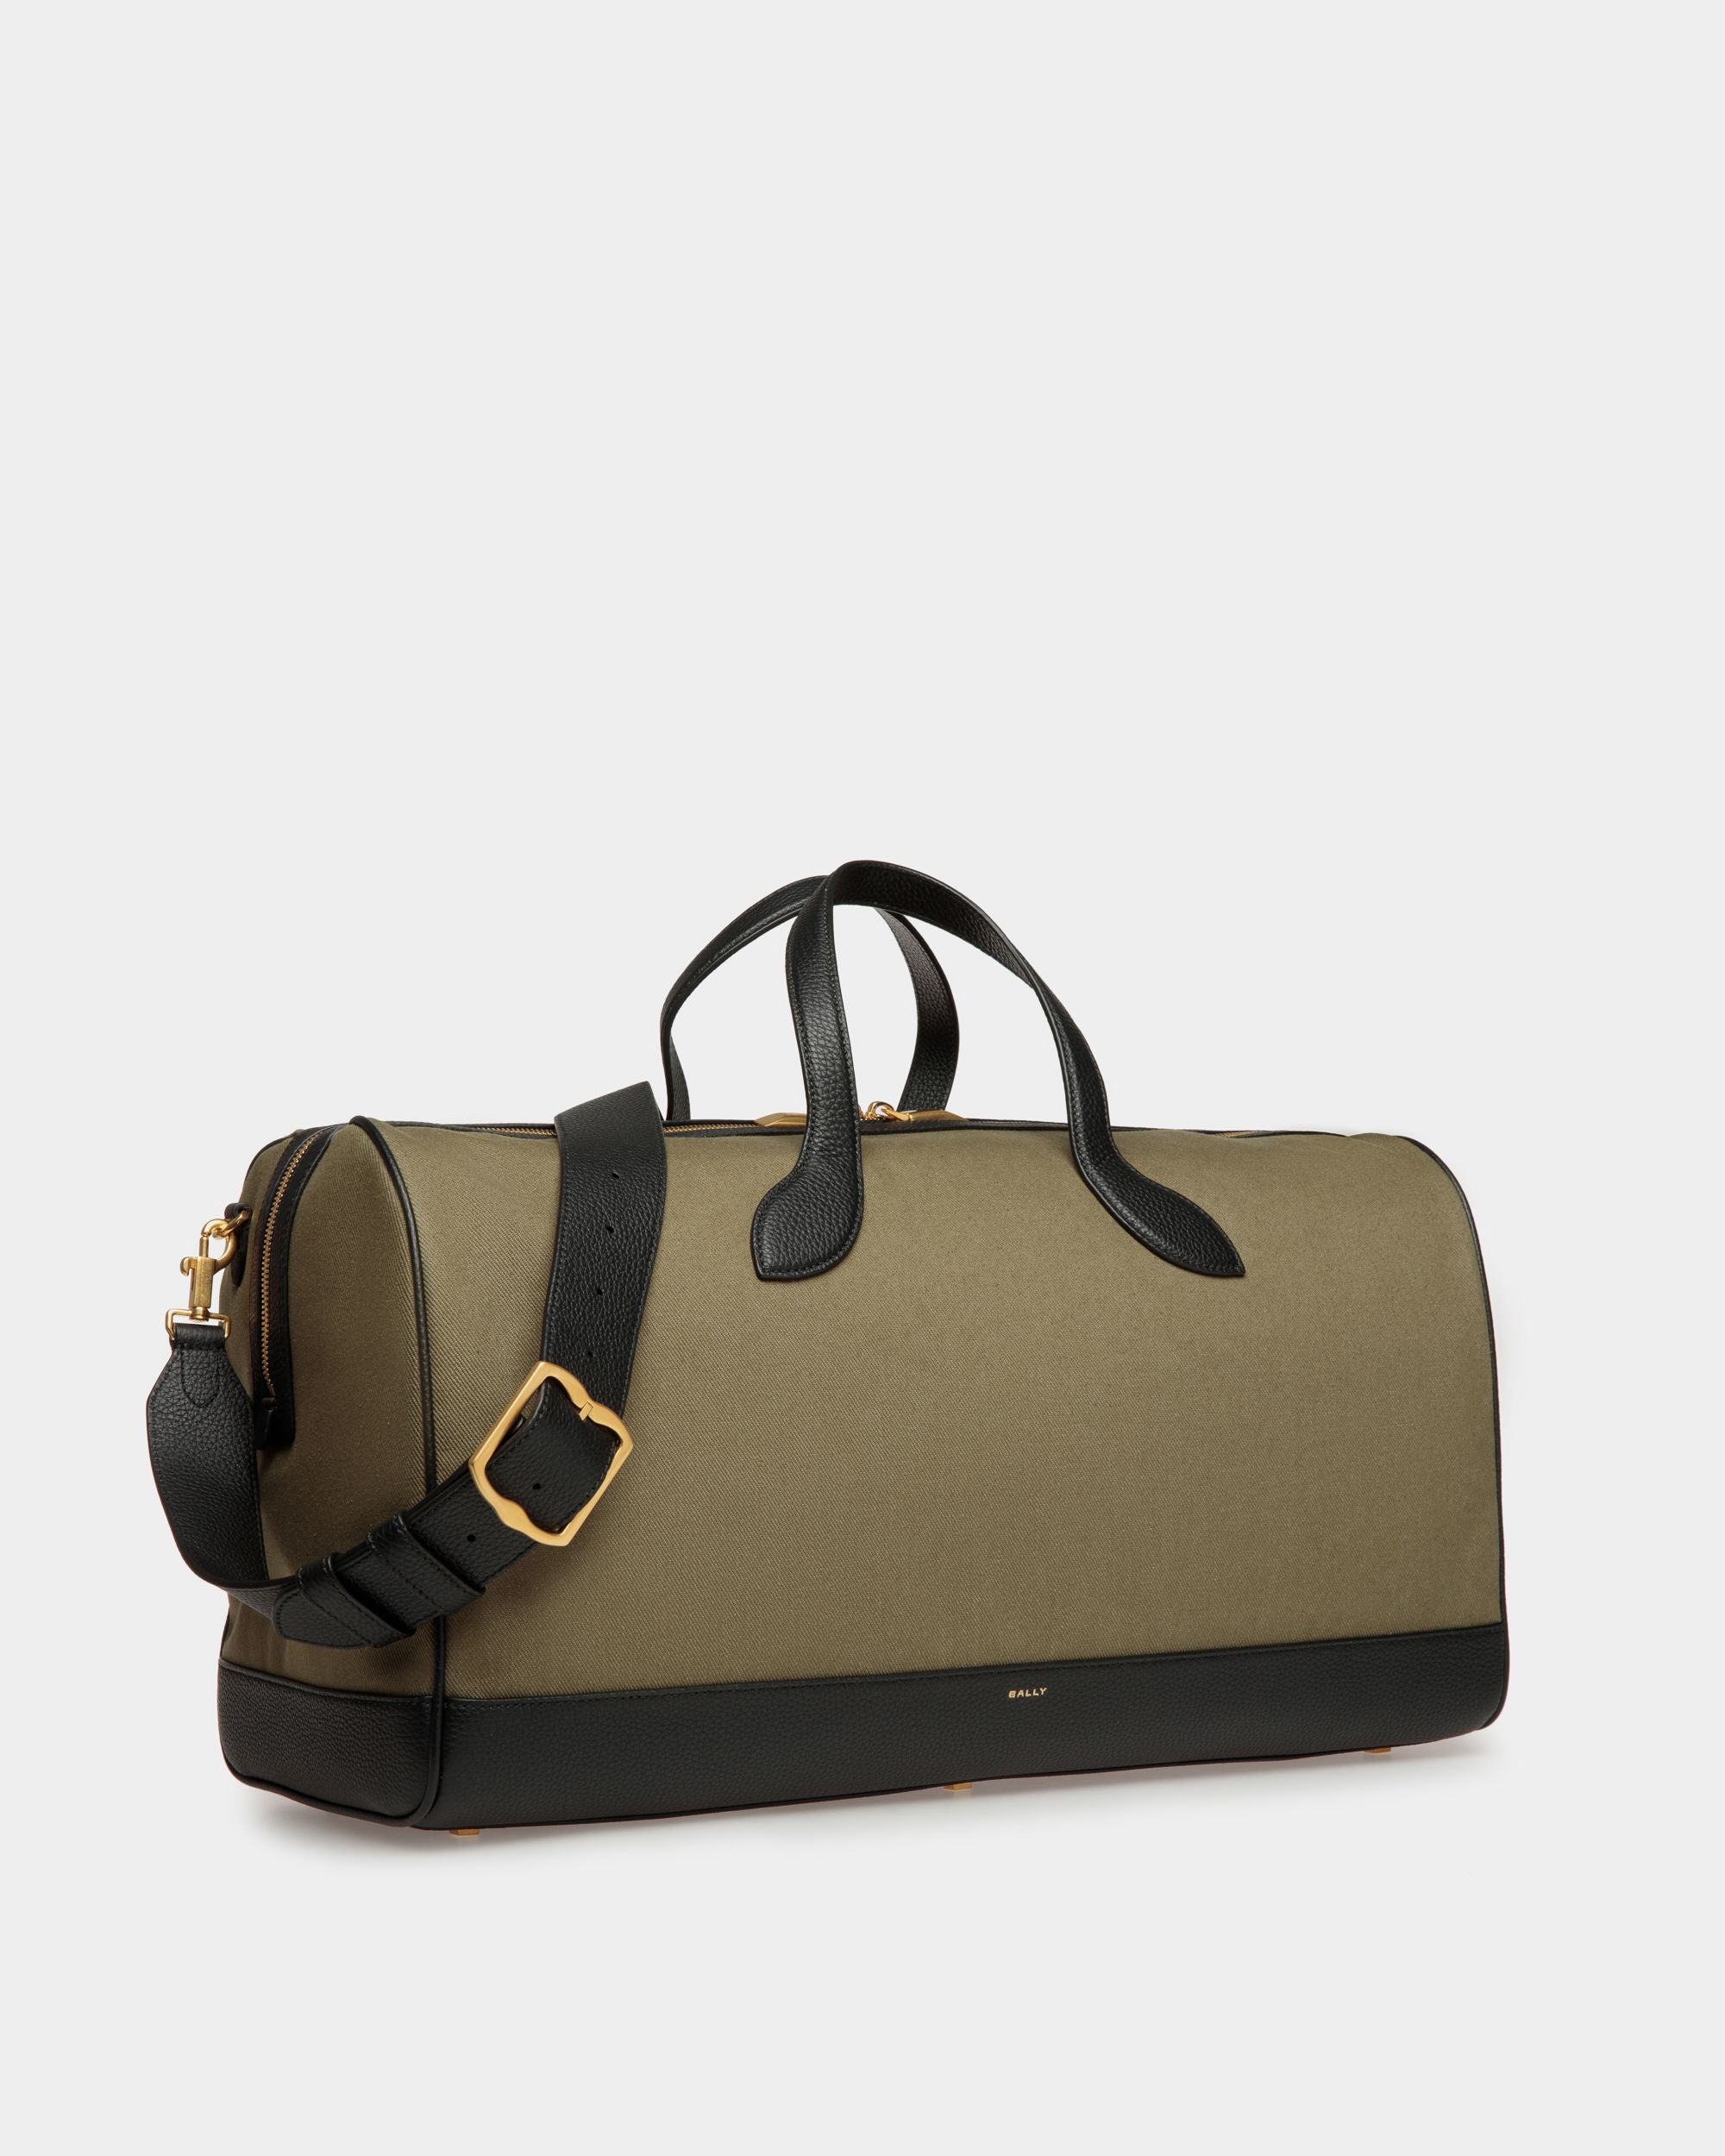 Bar | Men's Weekender in Green Canvas And Black Leather | Bally | Still Life 3/4 Front